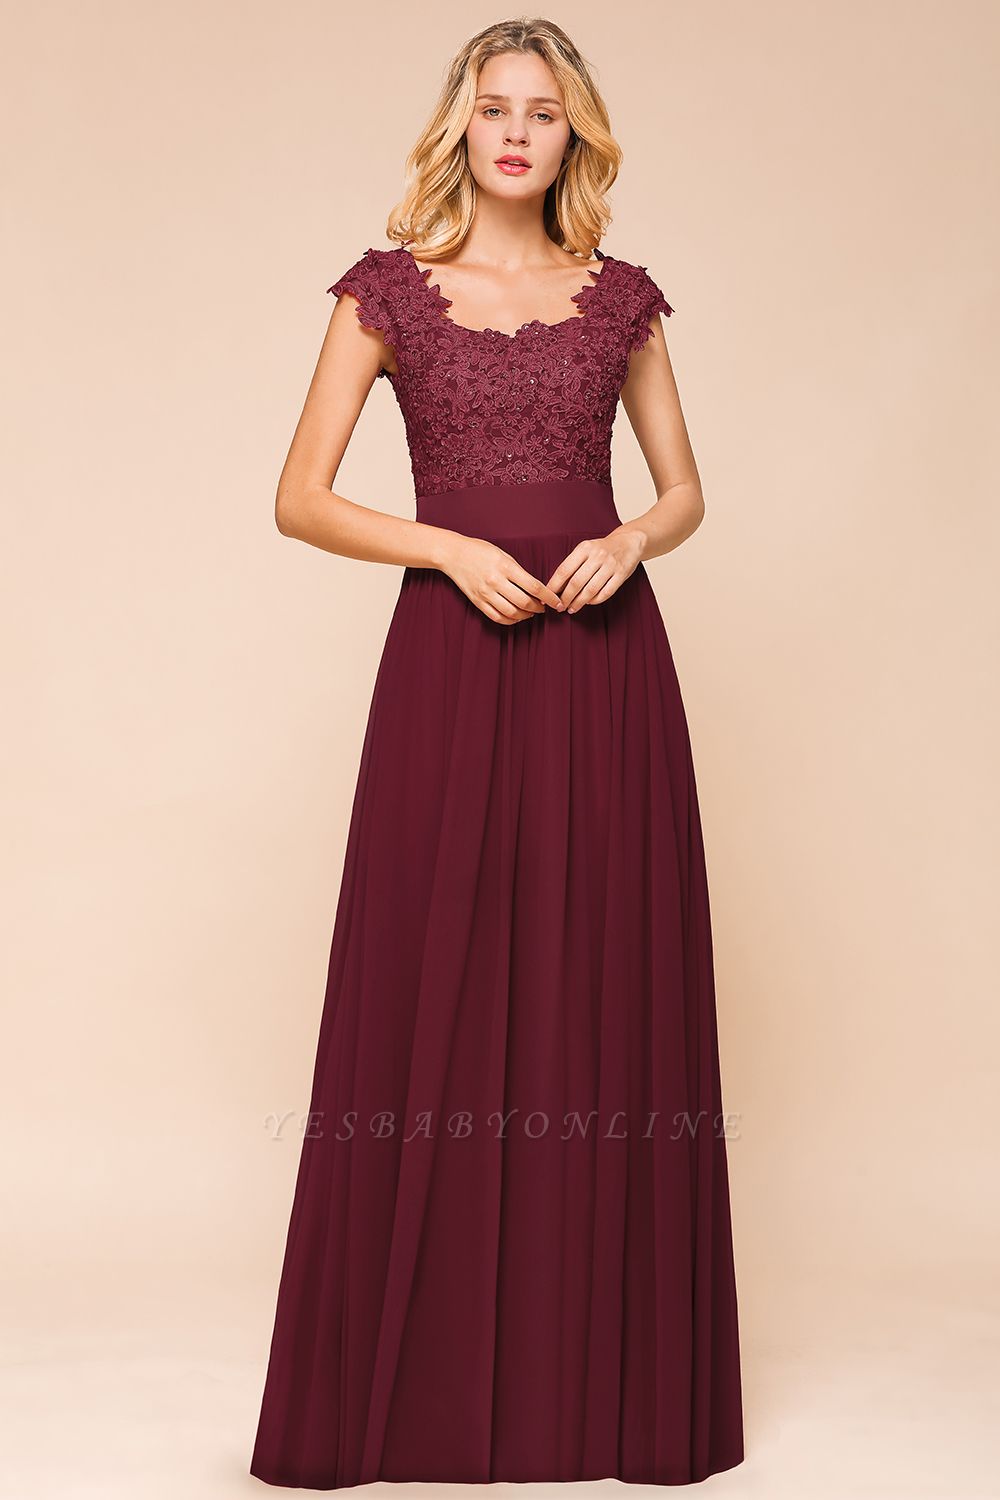 Cap Sleeve Scoop Lace Beading Floor Length Formal Evening Dresses | A Line Chiffon Sexy Prom Dresses